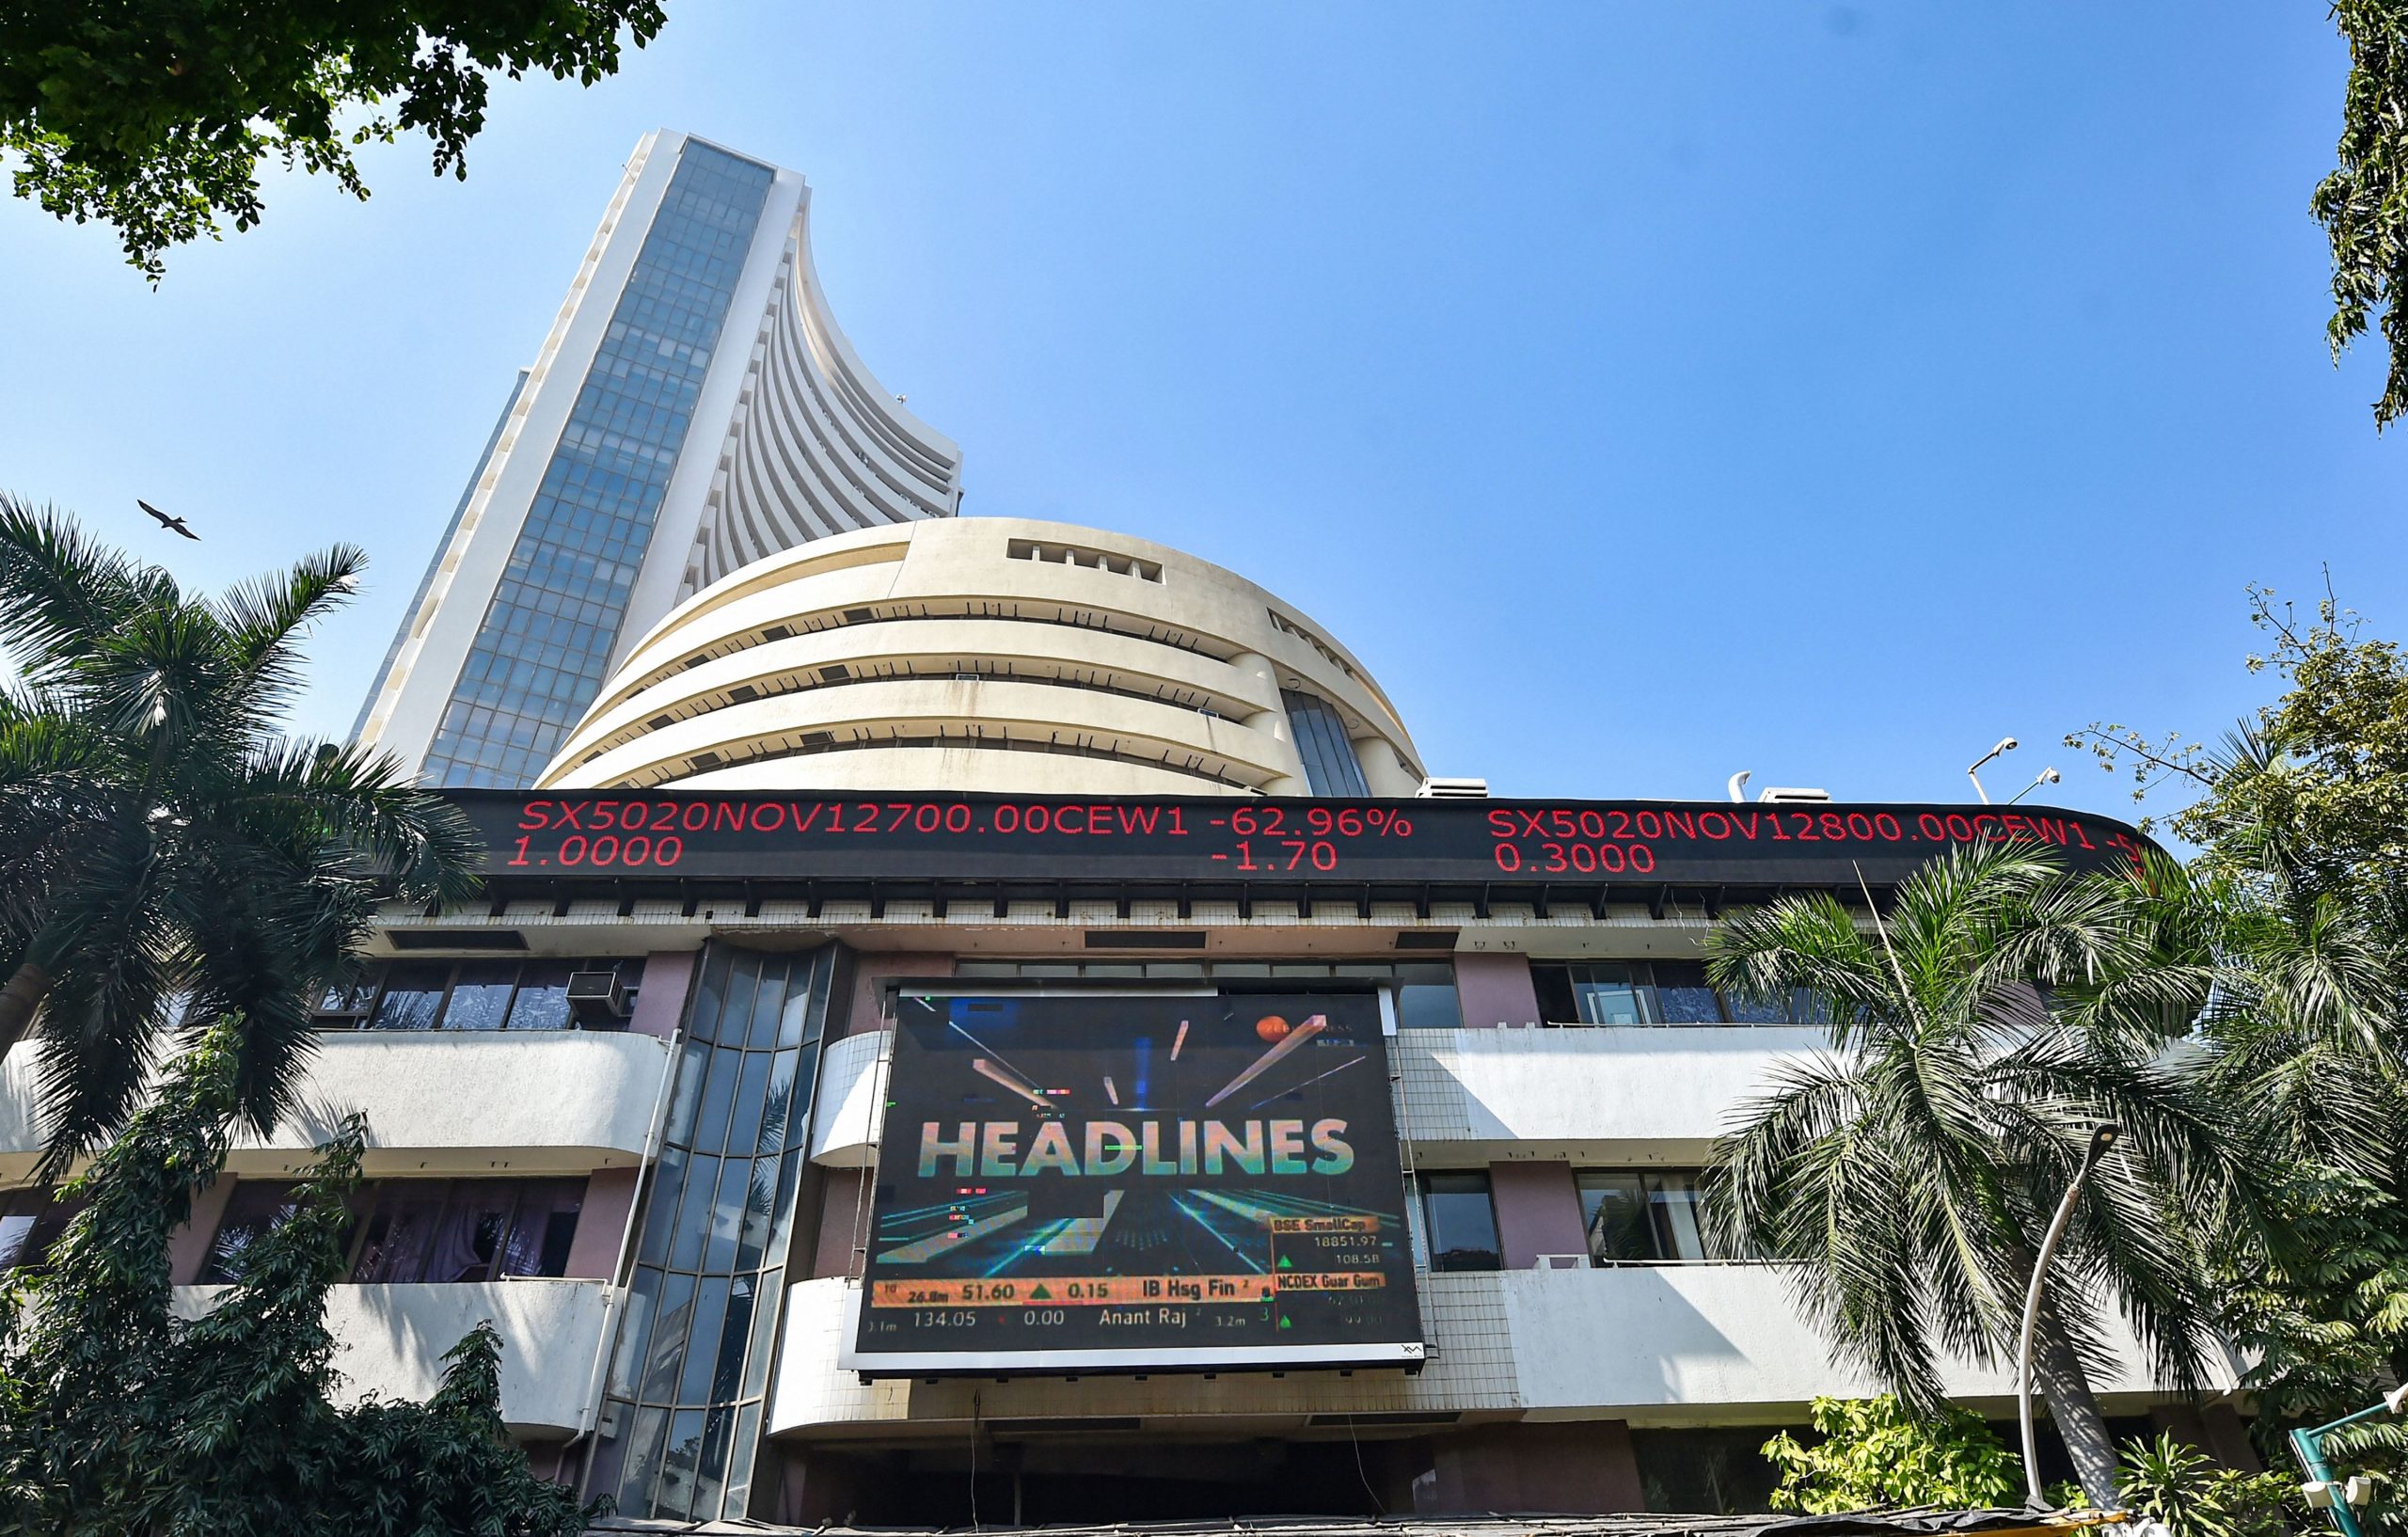 Trending Stocks: Mindtree, TVS Motor, Wipro, SBI and others in news today